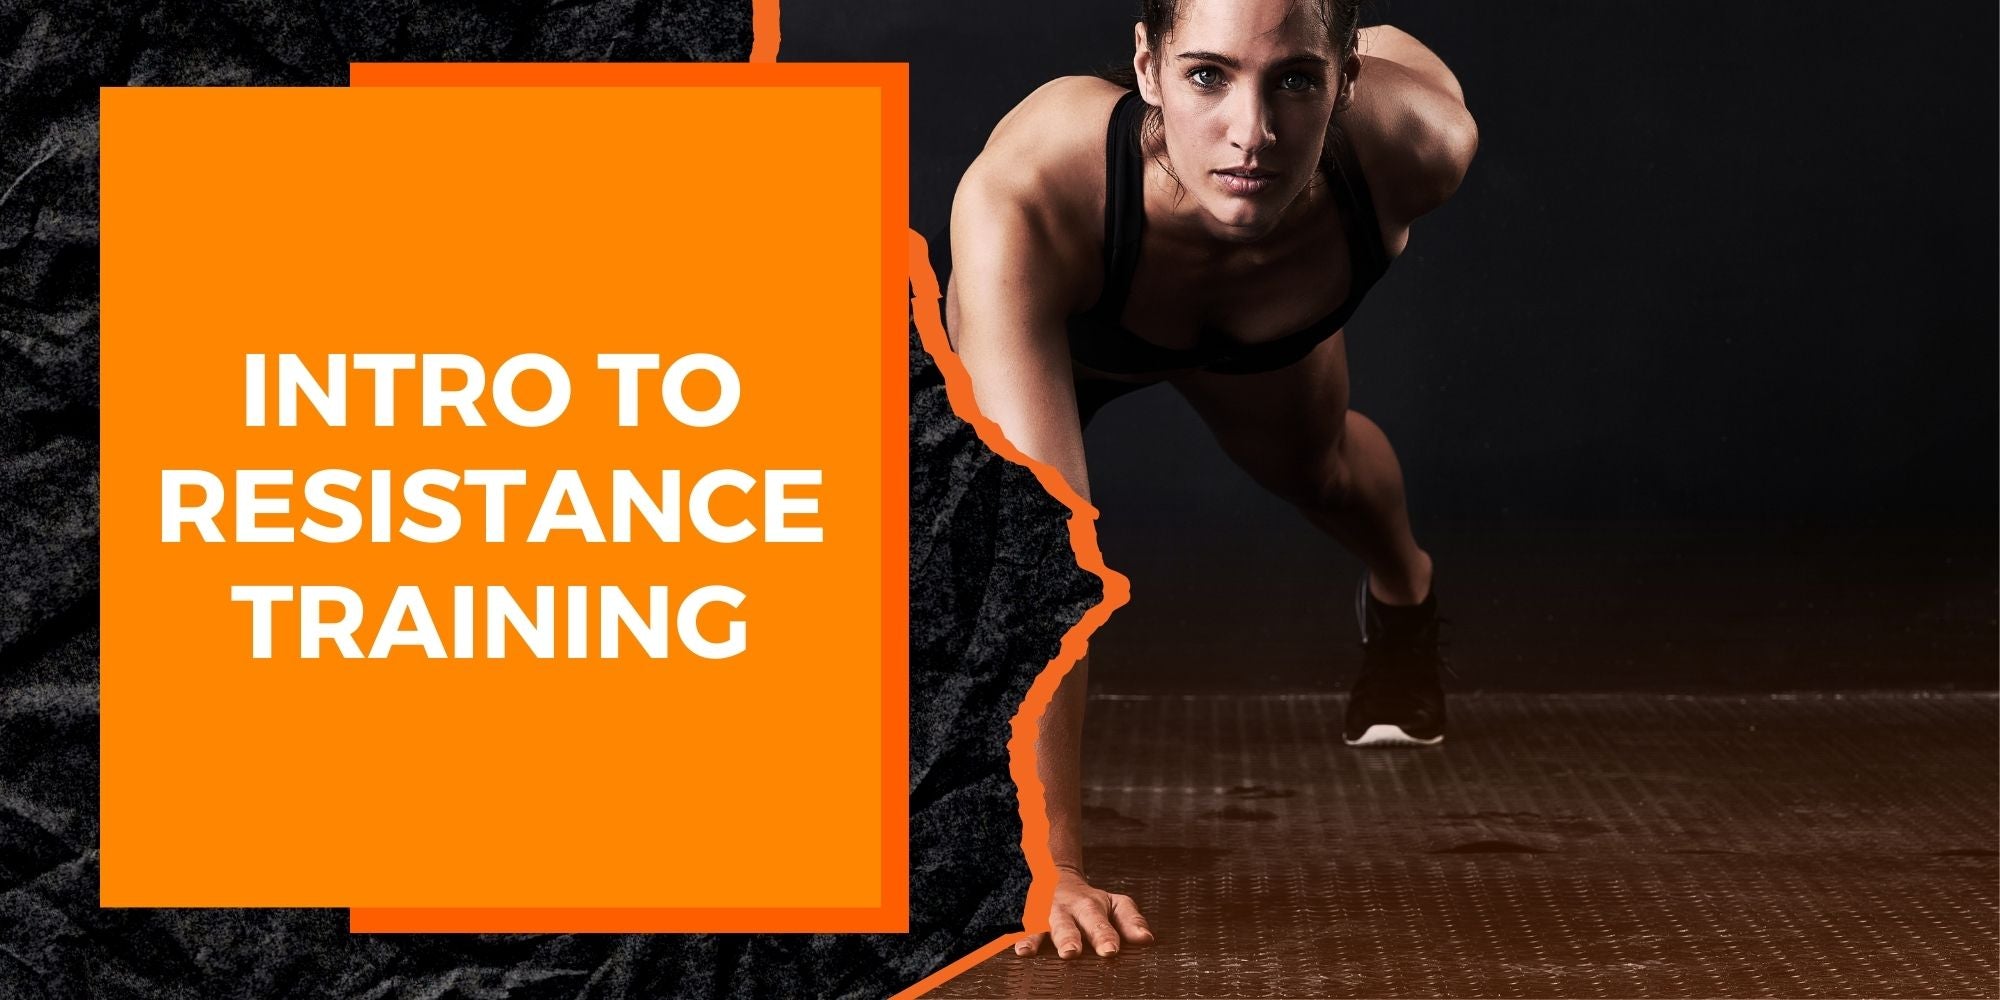 An Introduction to Resistance Training